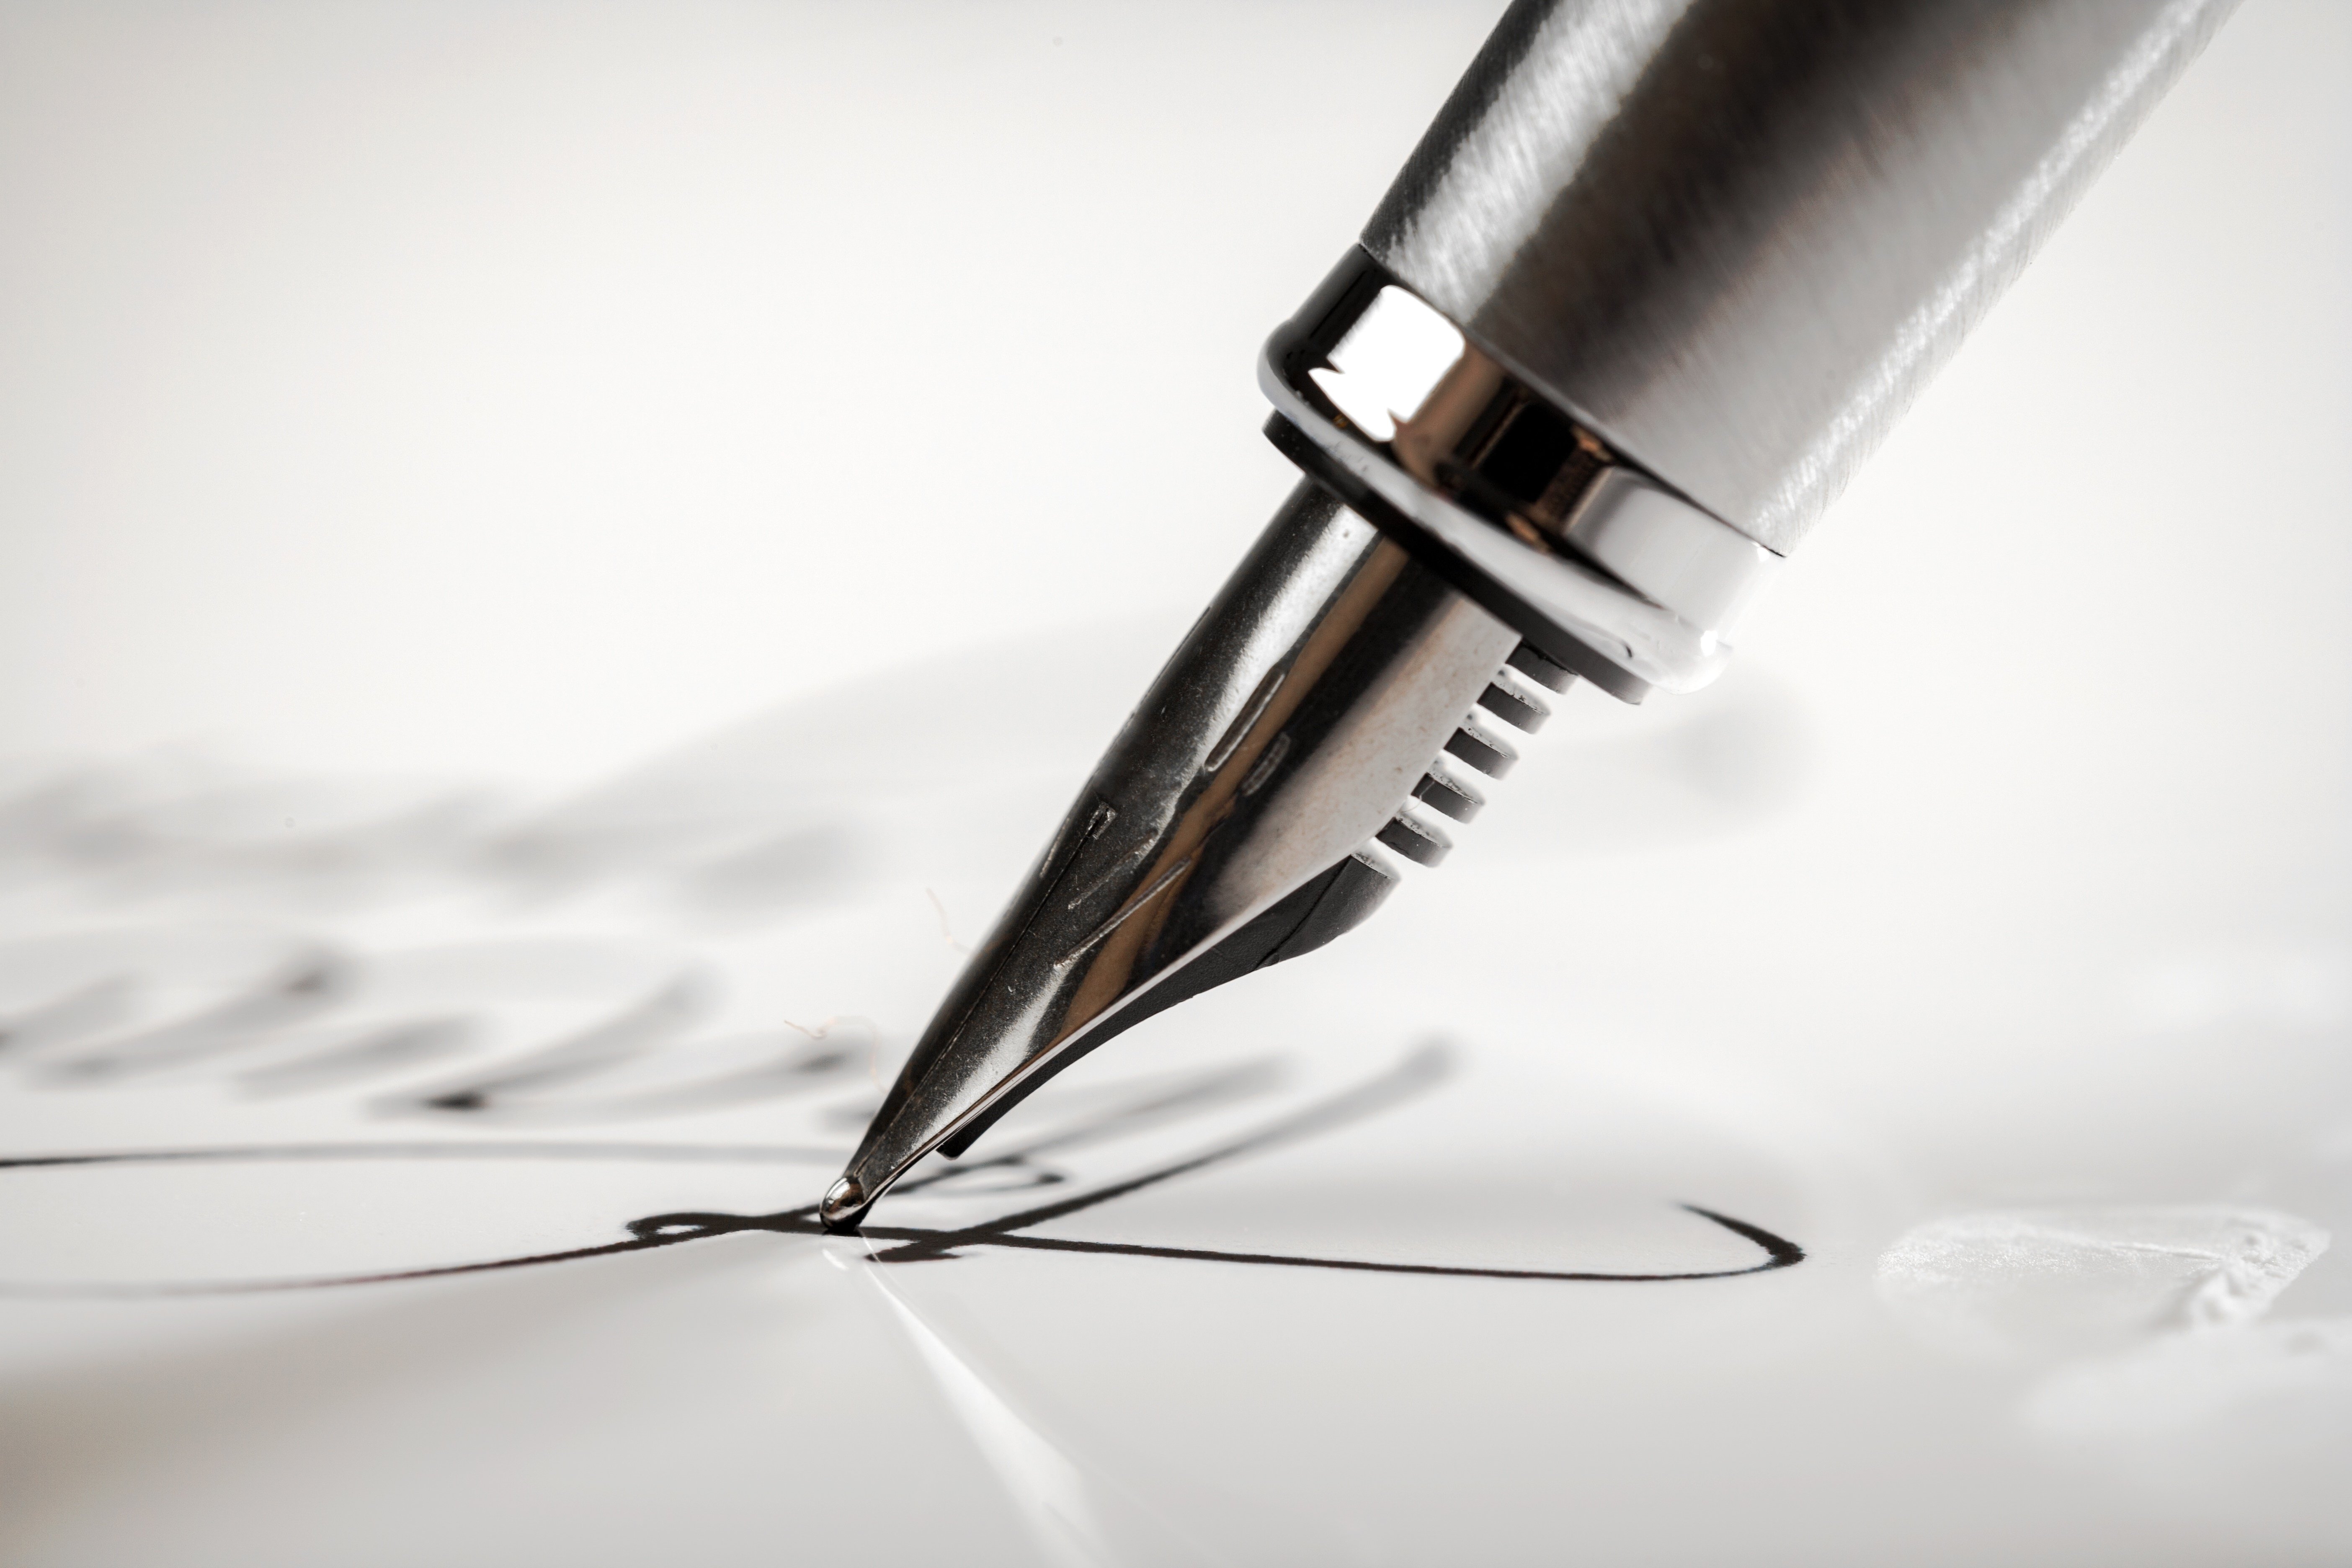 A pen being used to write on paper. | Source: Shutterstock